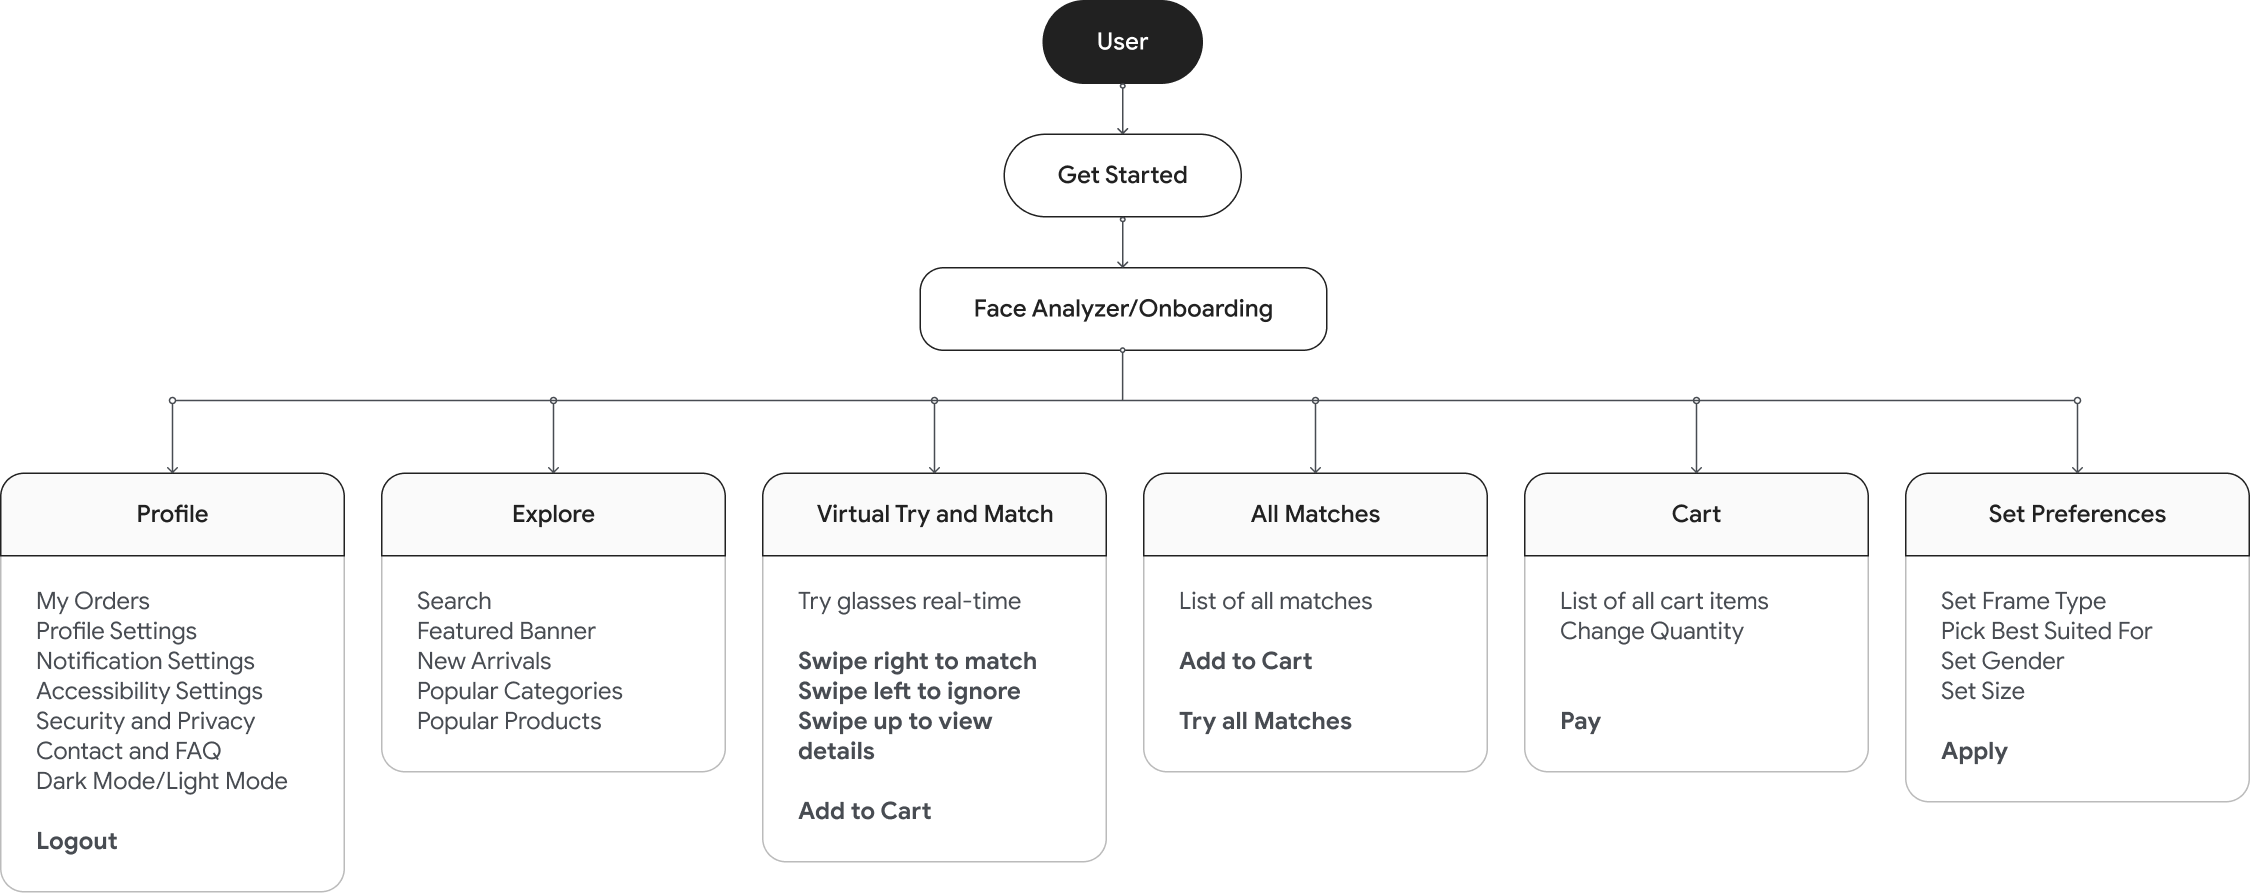 Information Architecture of AR app